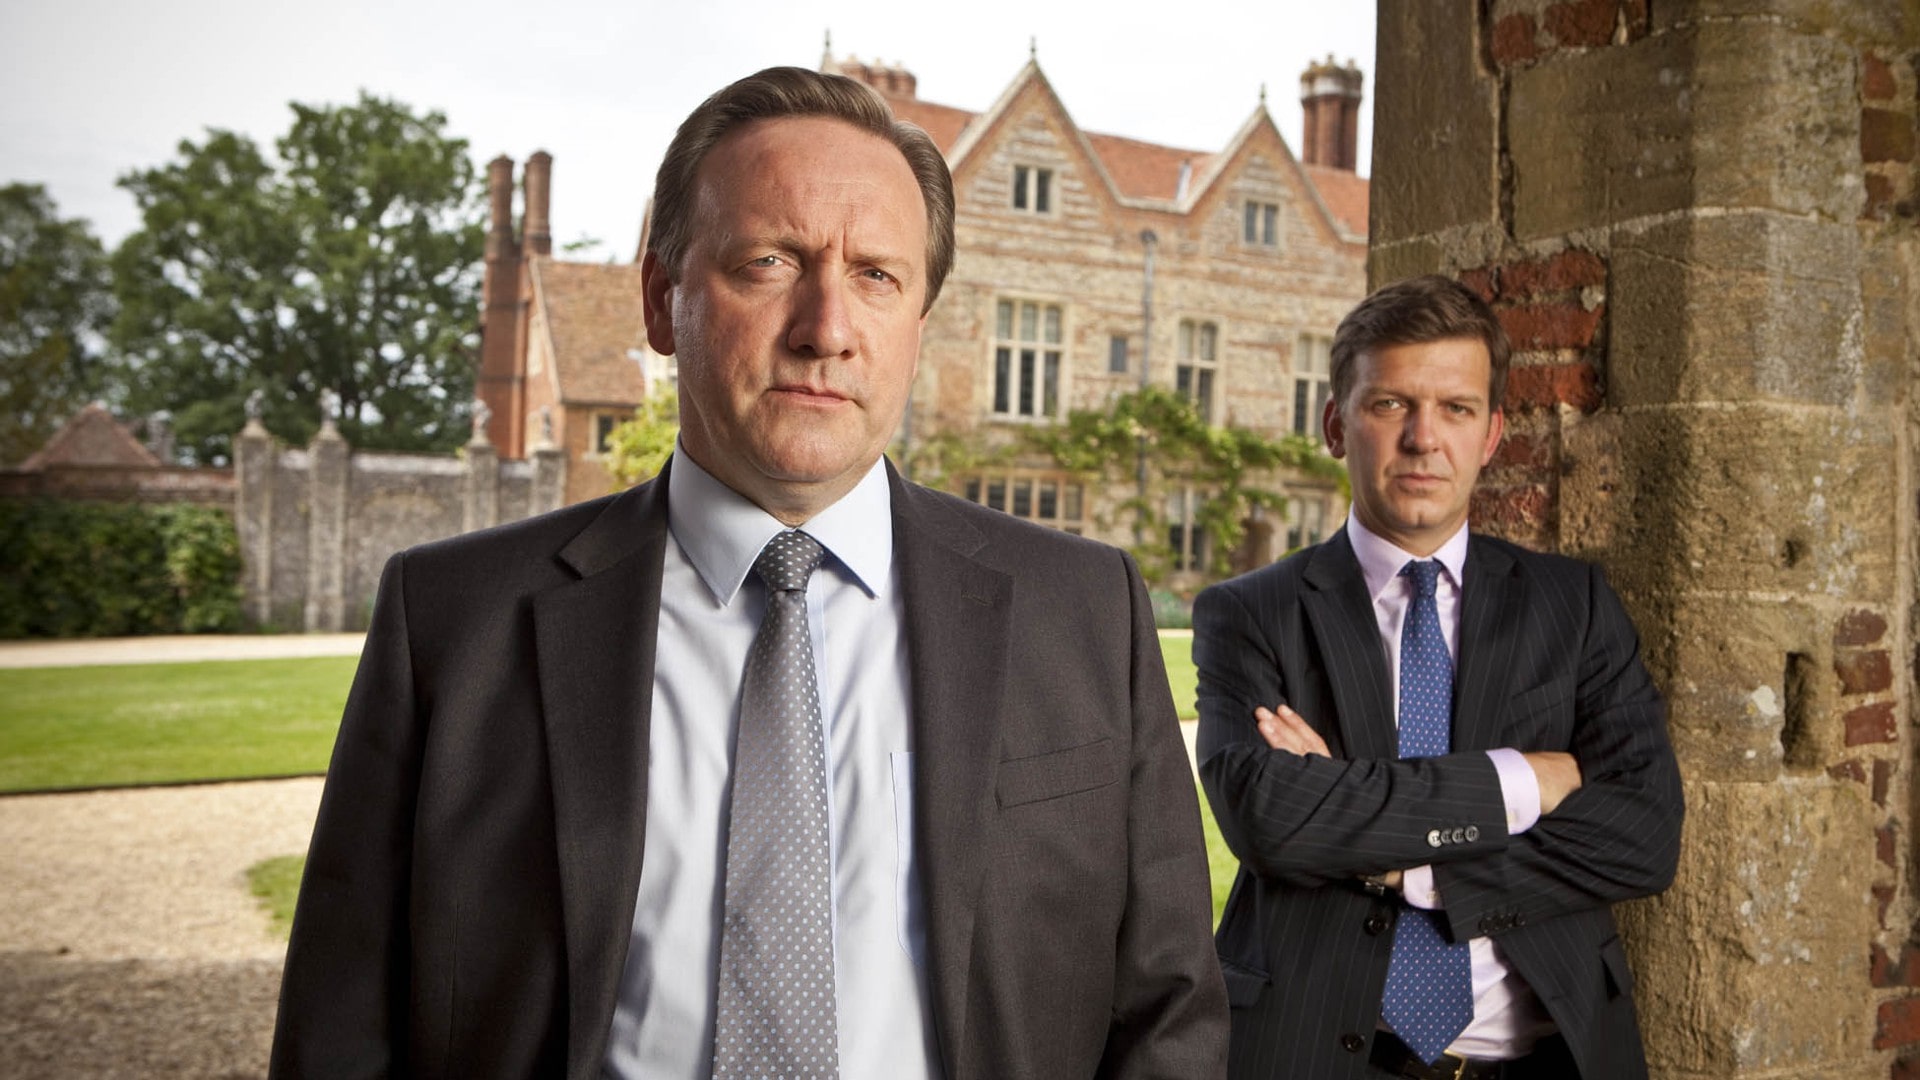 123movies - Click and watch Midsomer Murders - Season 22 Free and